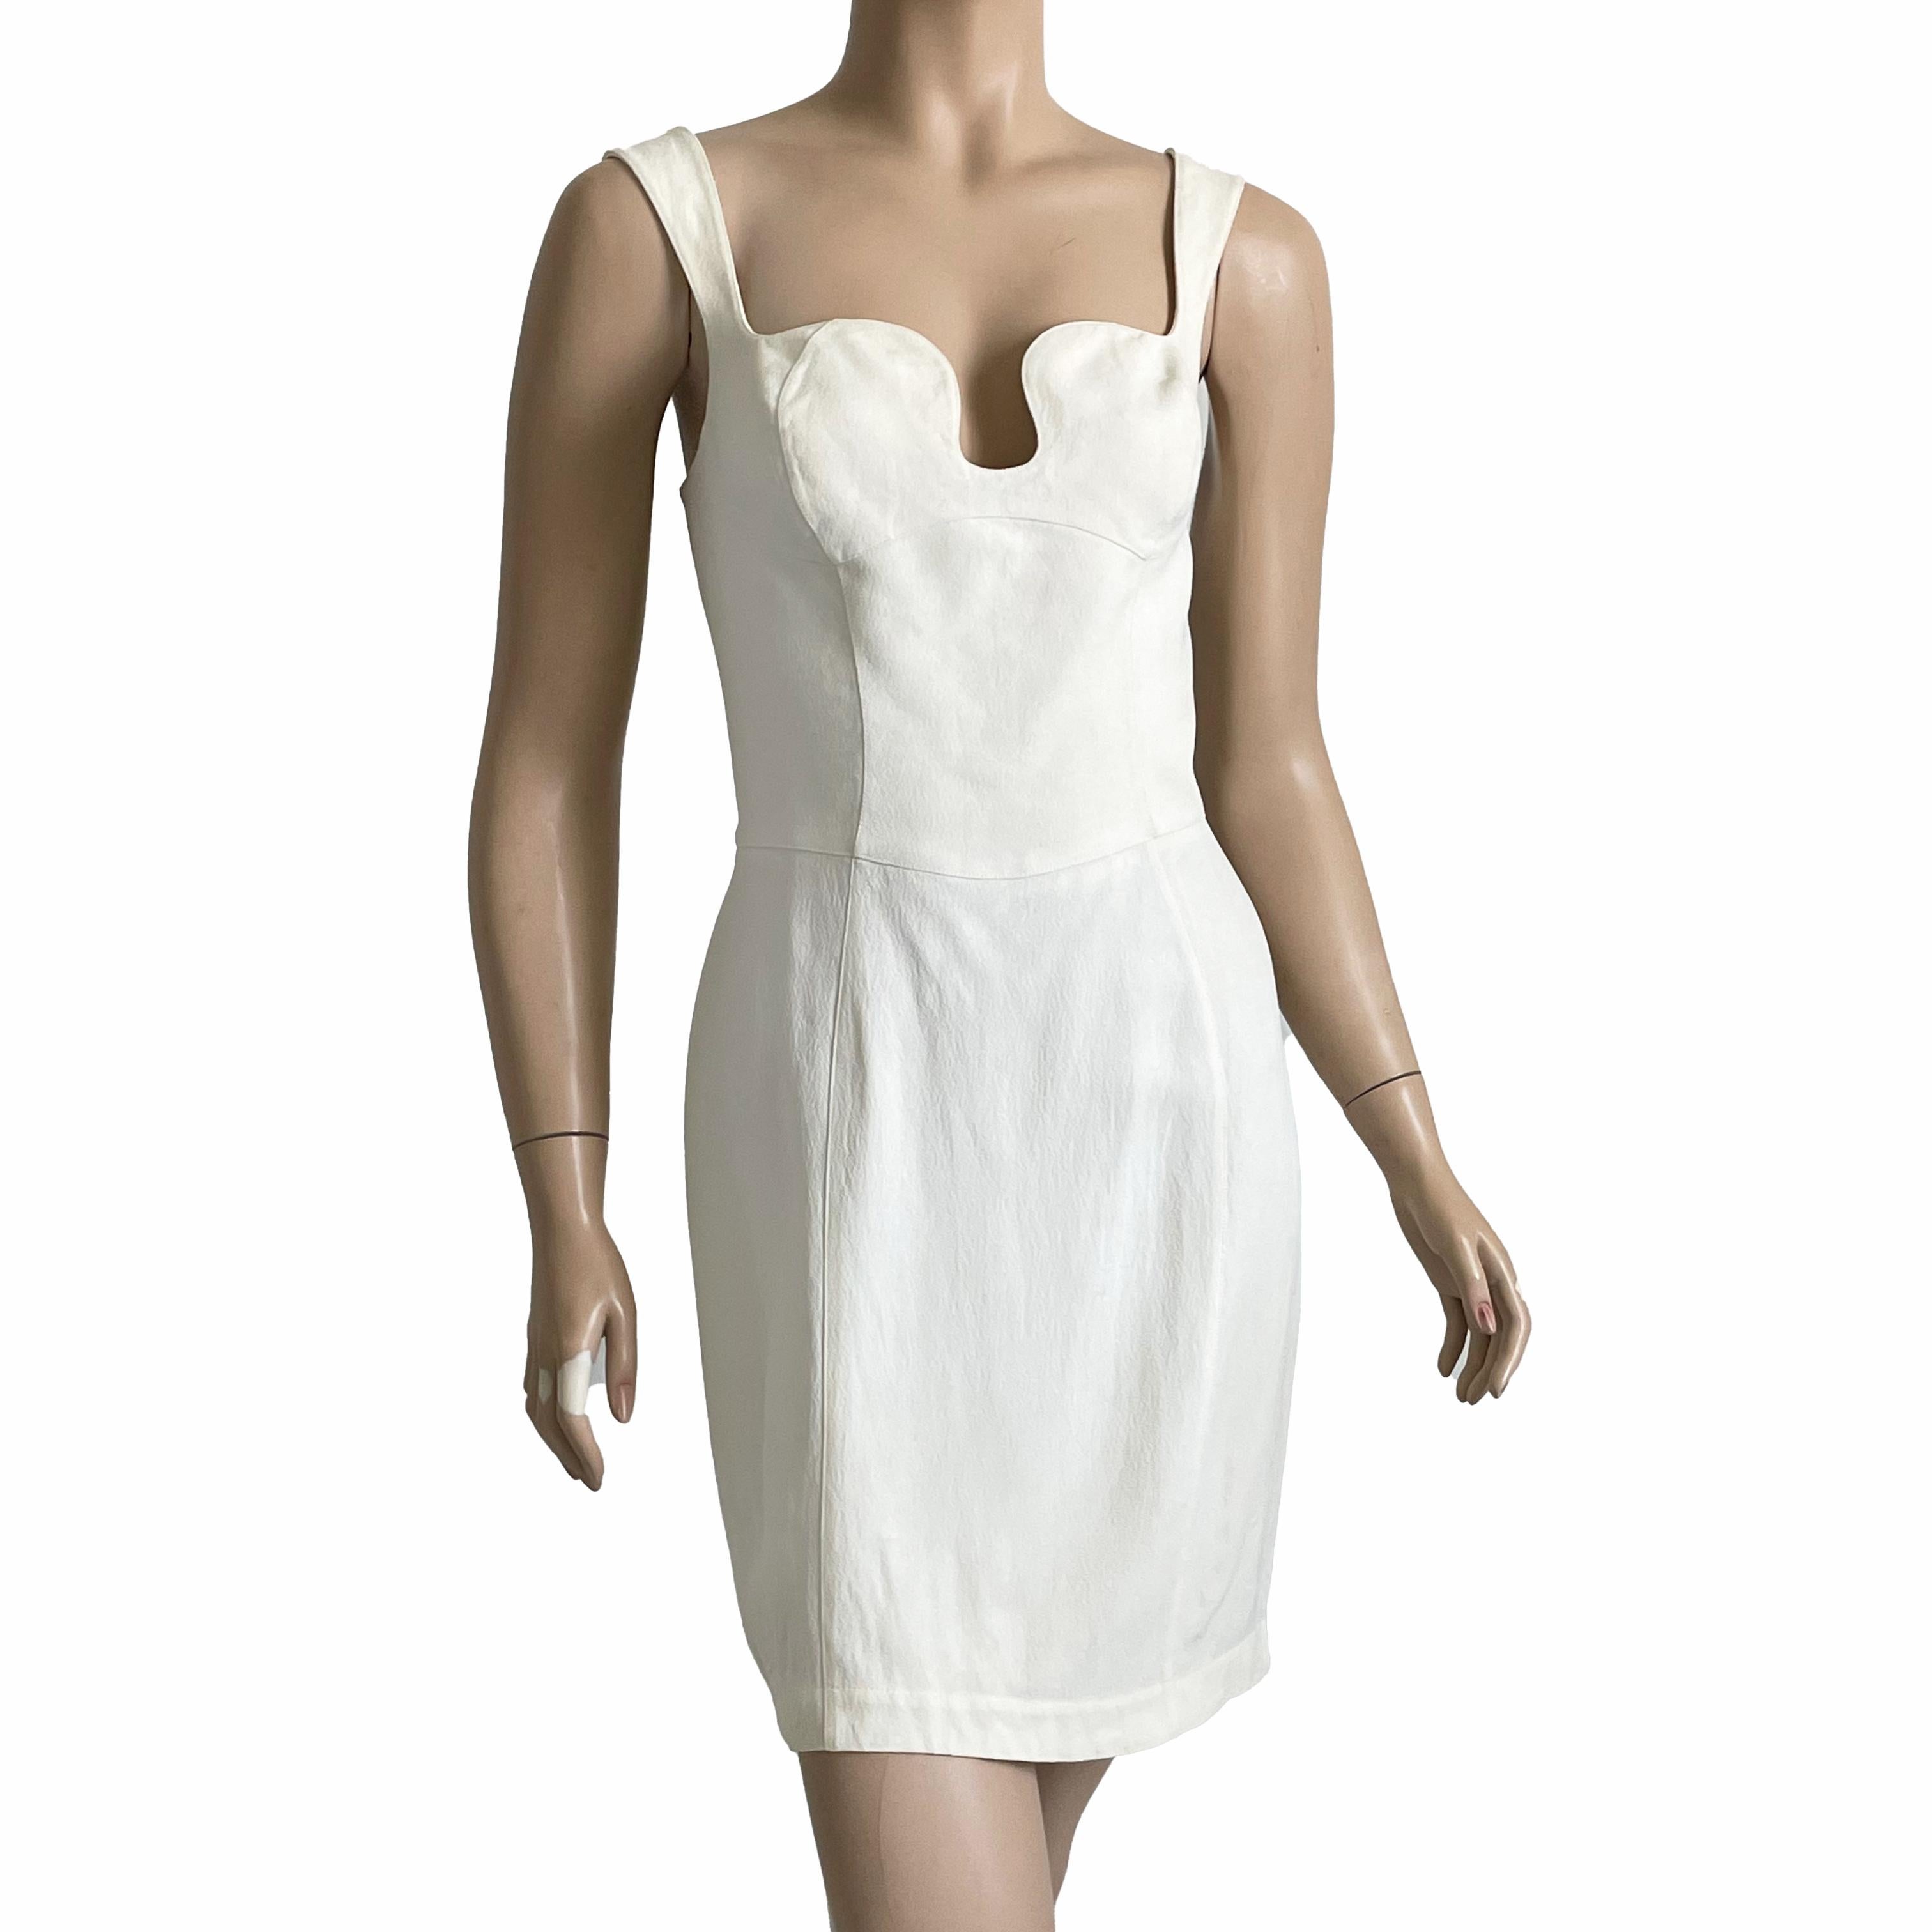 Women's Thierry Mugler Cocktail Dress White Crepe Sculptural Chic Vintage 90s Sz 40 HTF For Sale